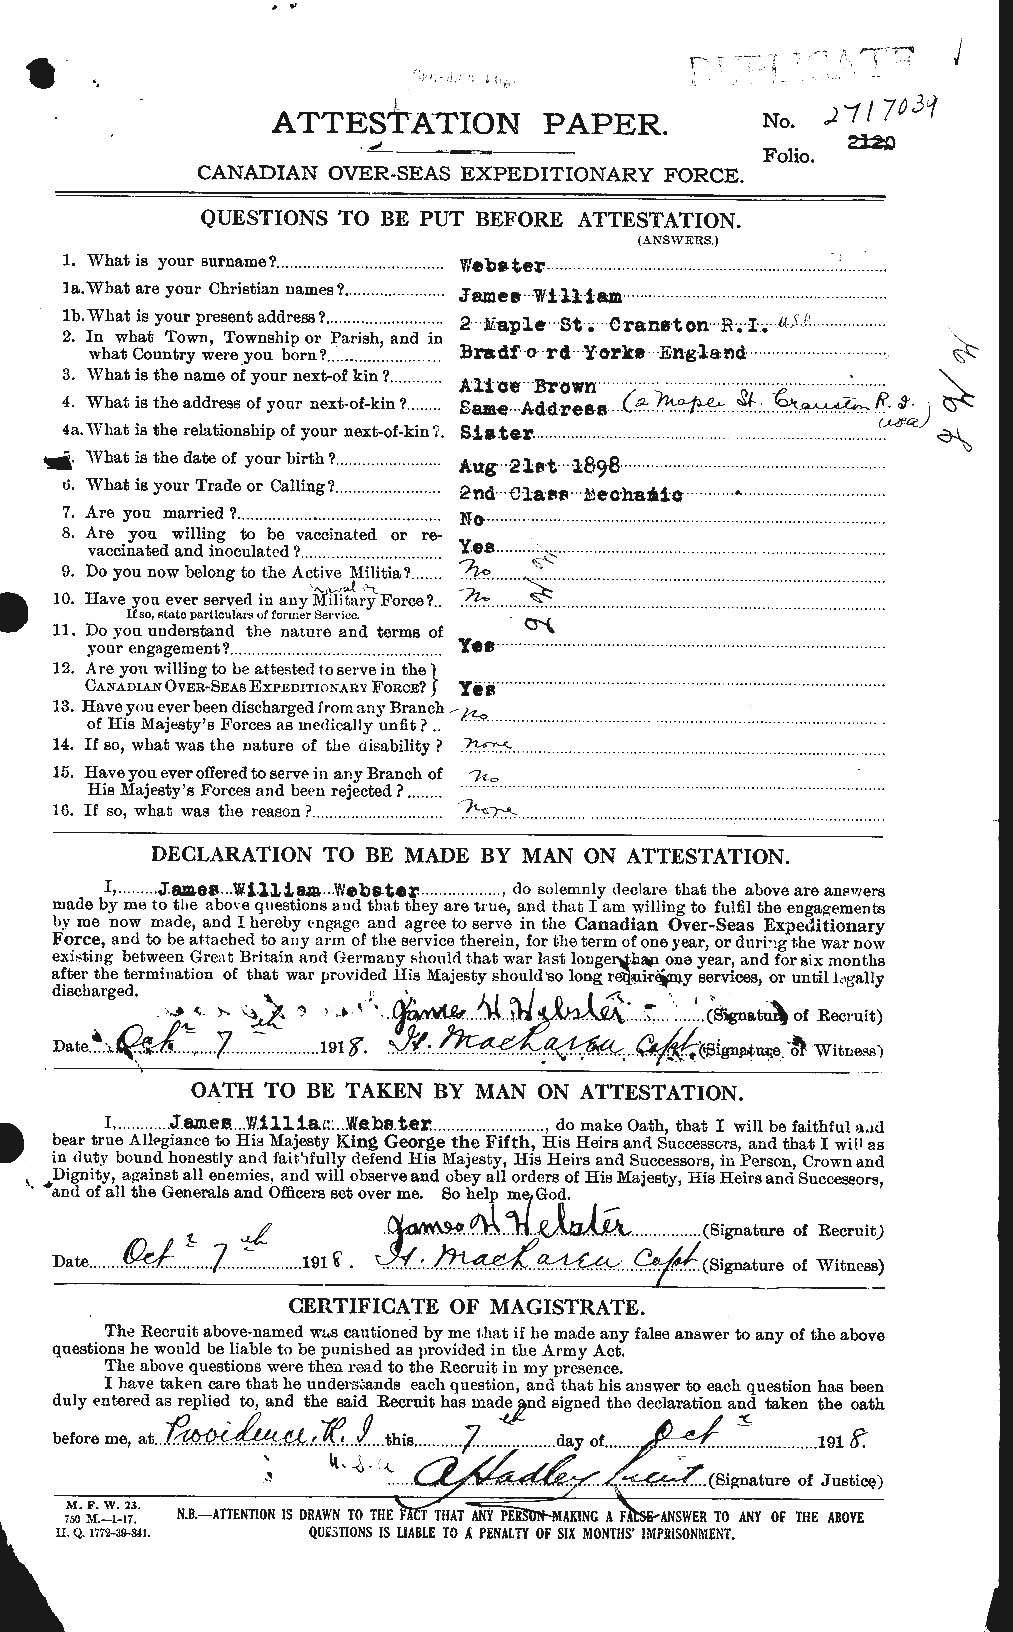 Personnel Records of the First World War - CEF 670465a